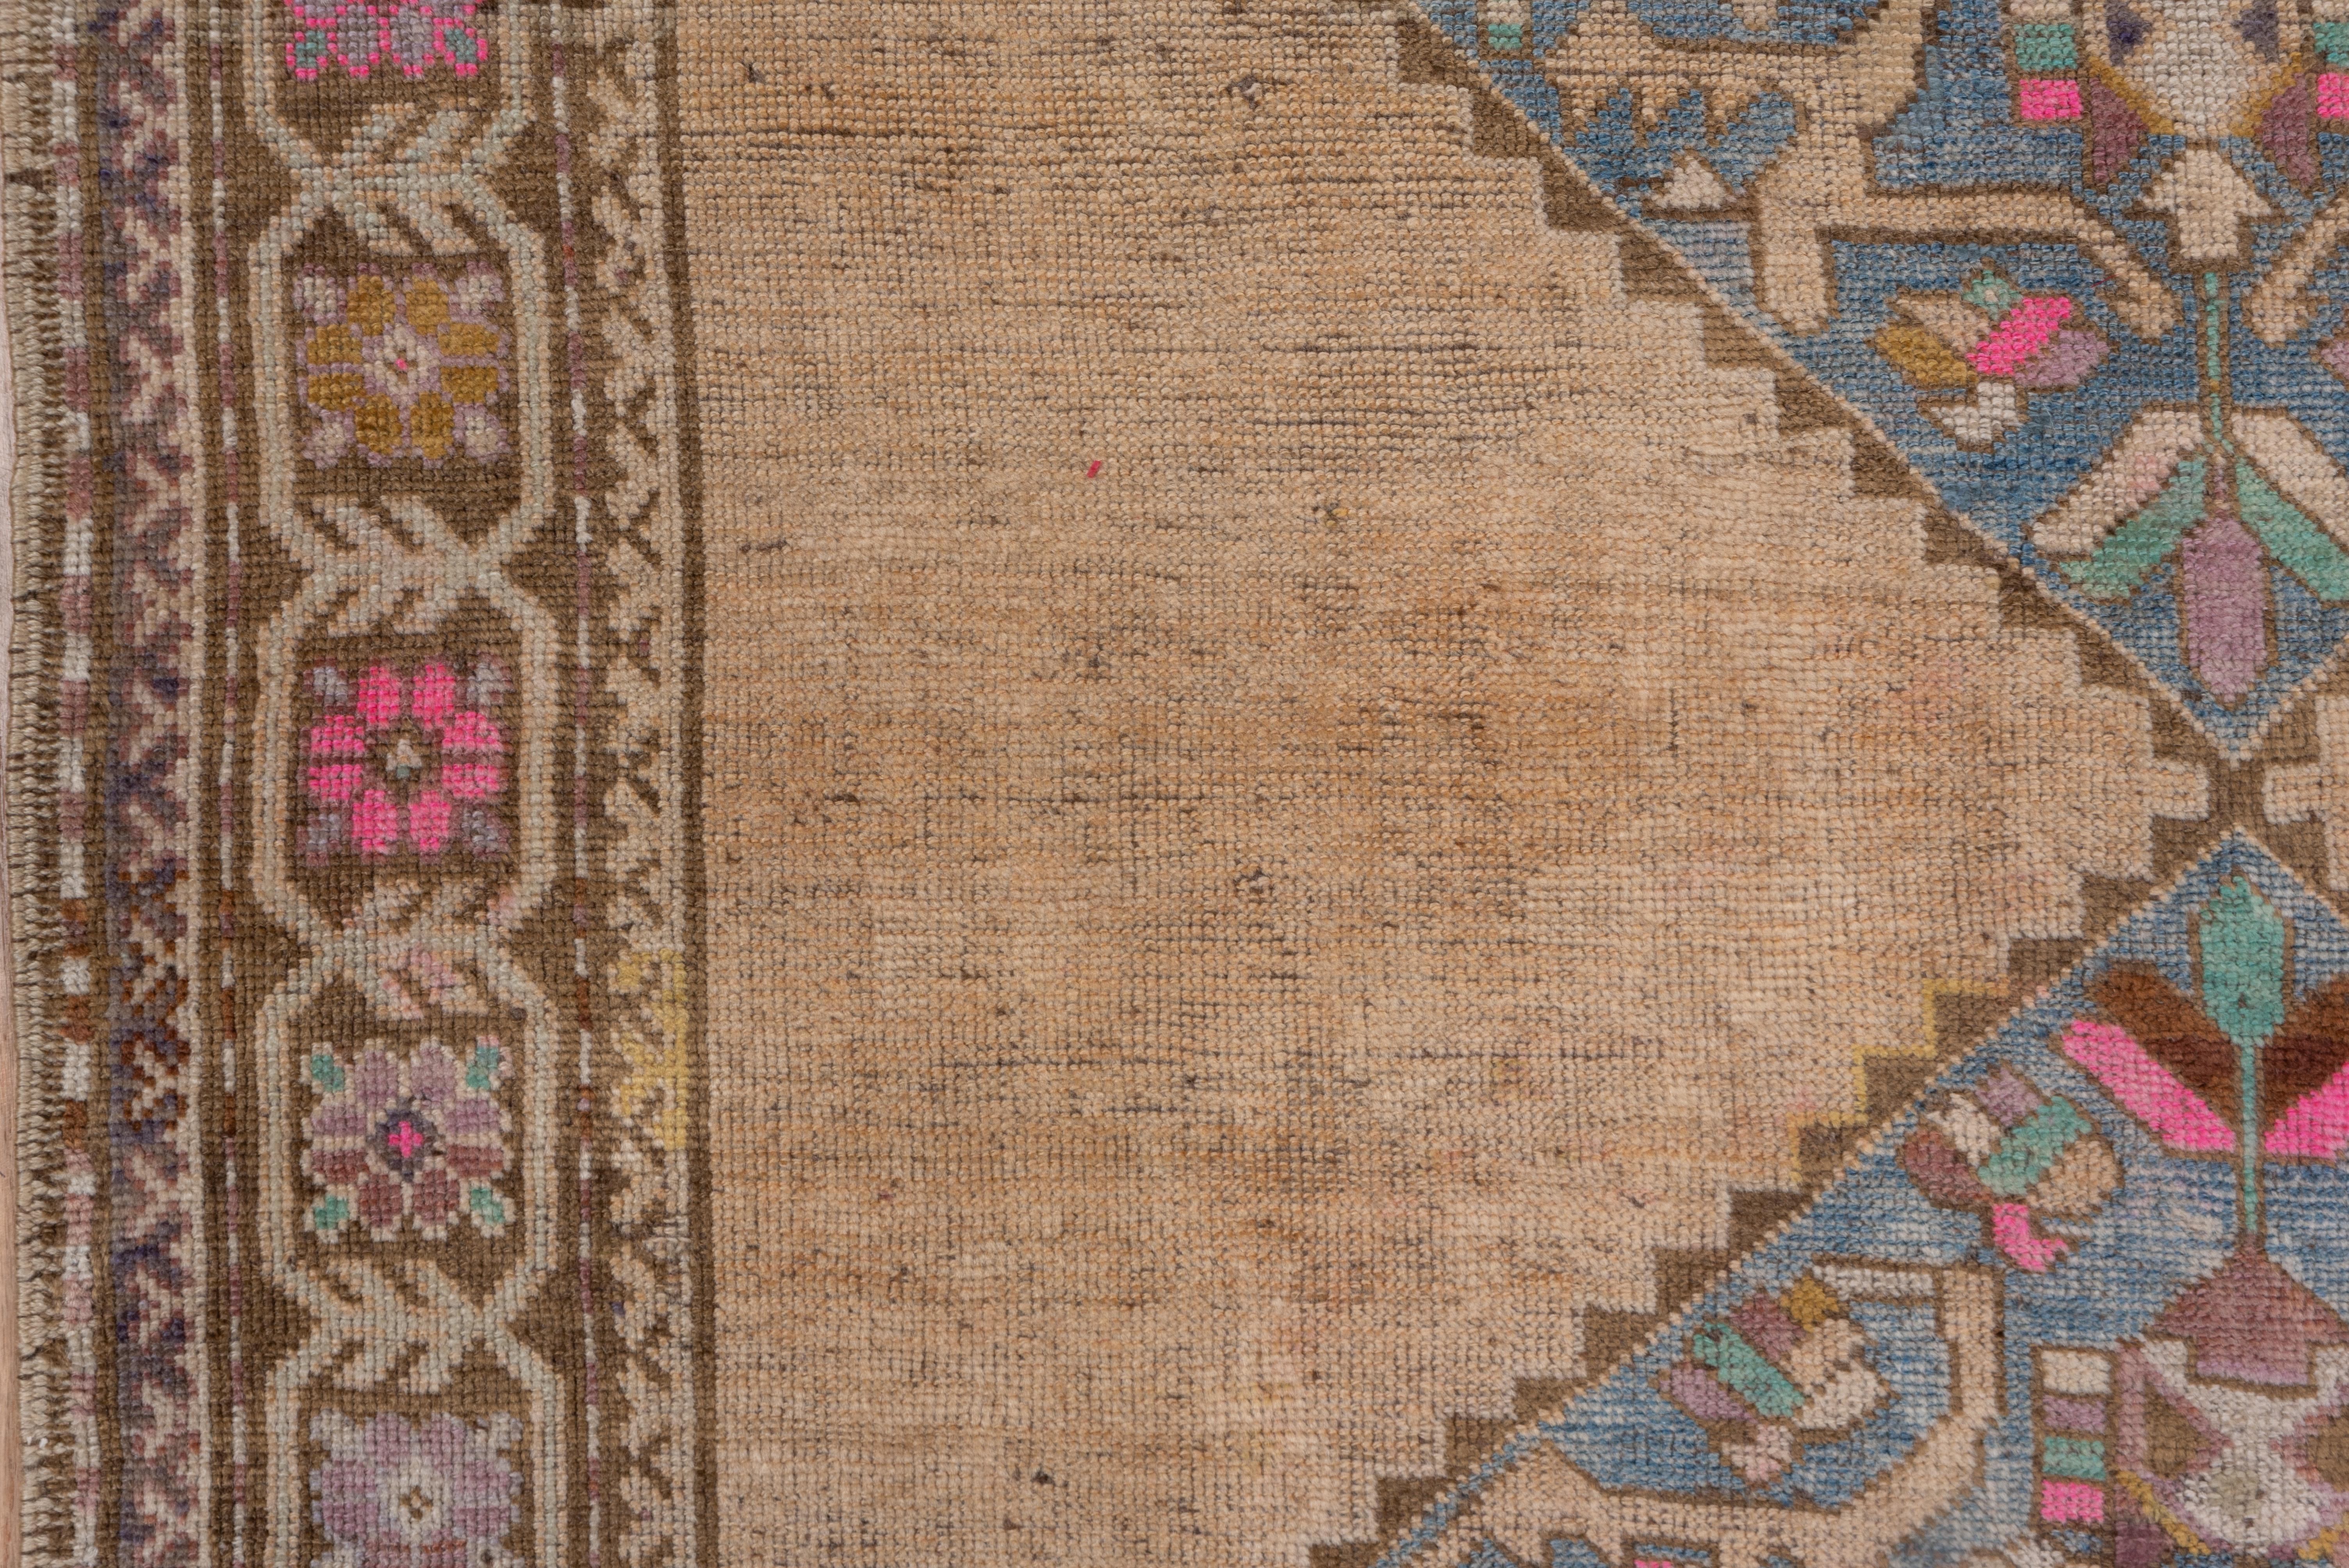 20th Century Antique Caucasian Karabagh Rug, Pink, Blue and Neutral Tones